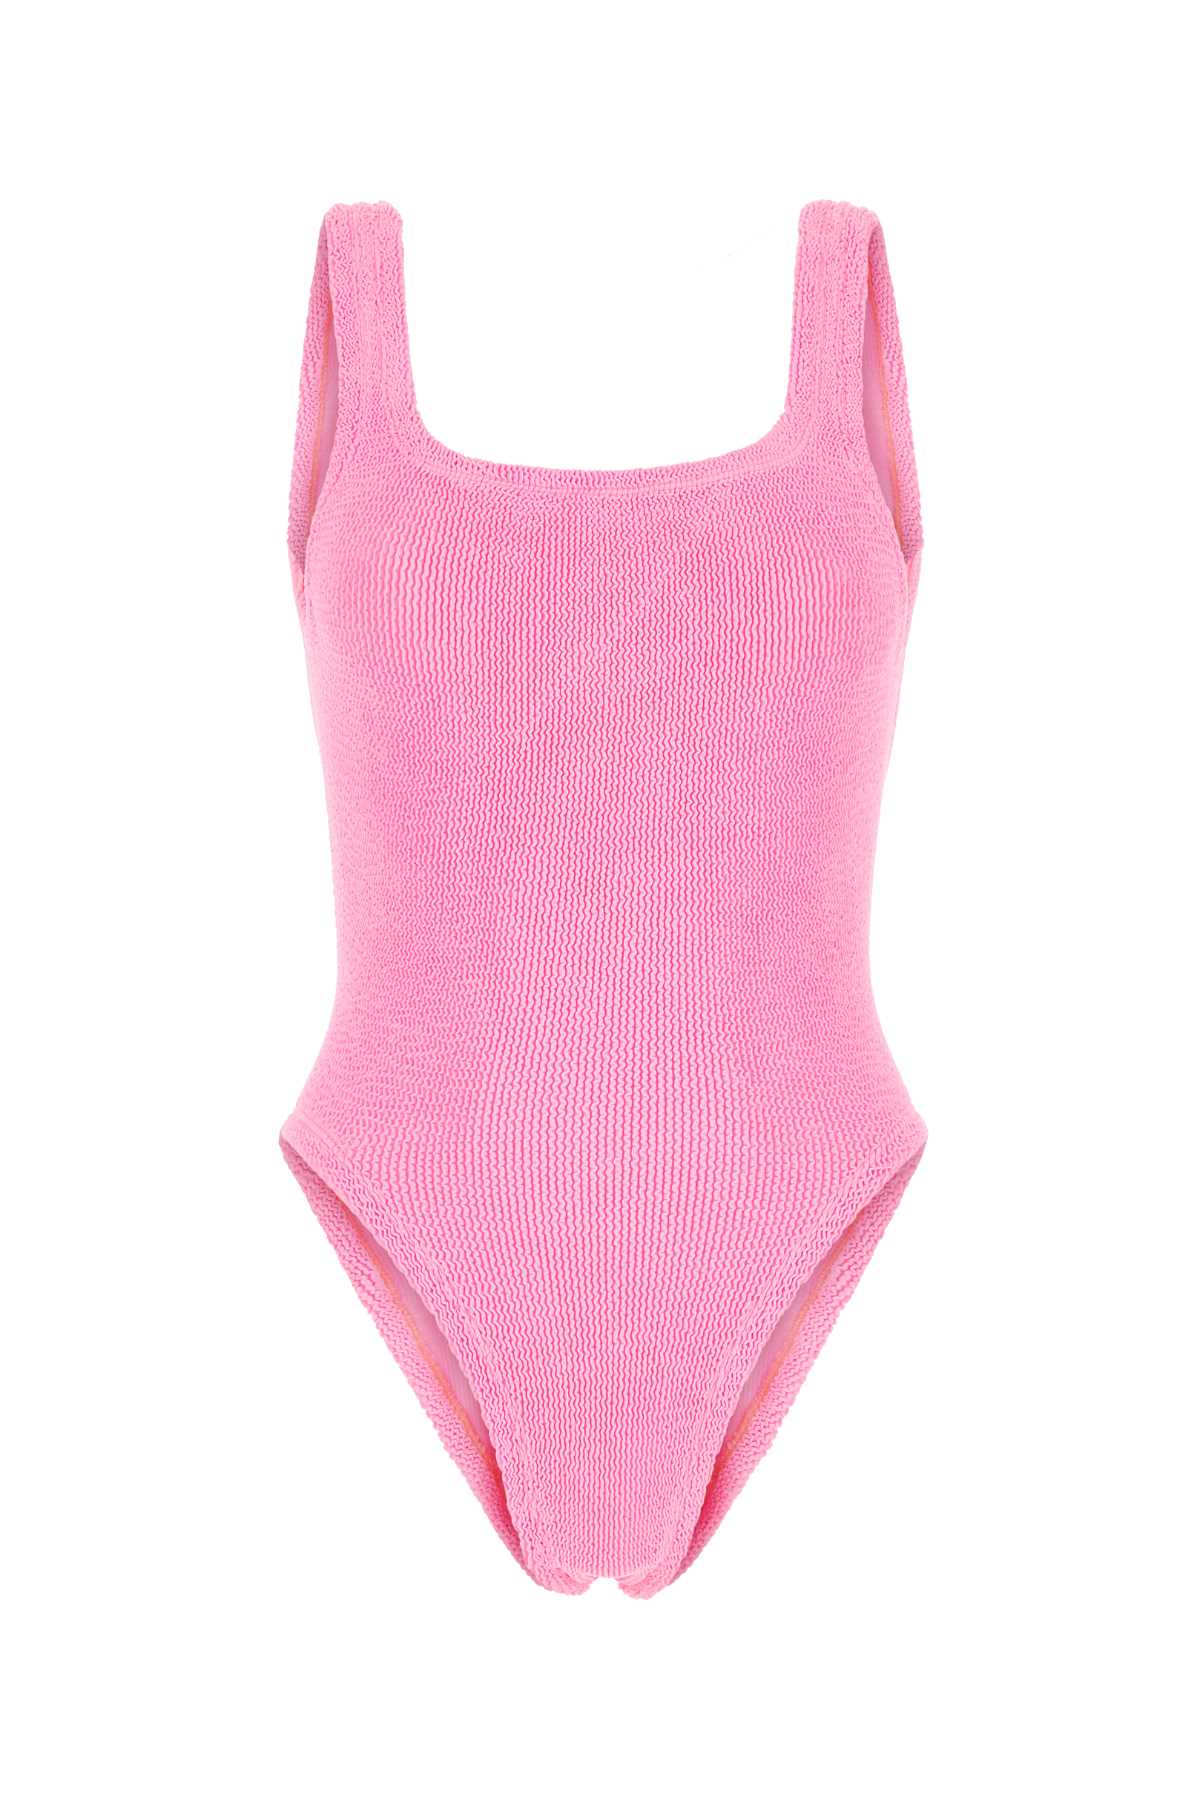 Fluo Pink Stretch Nylon Swimsuit